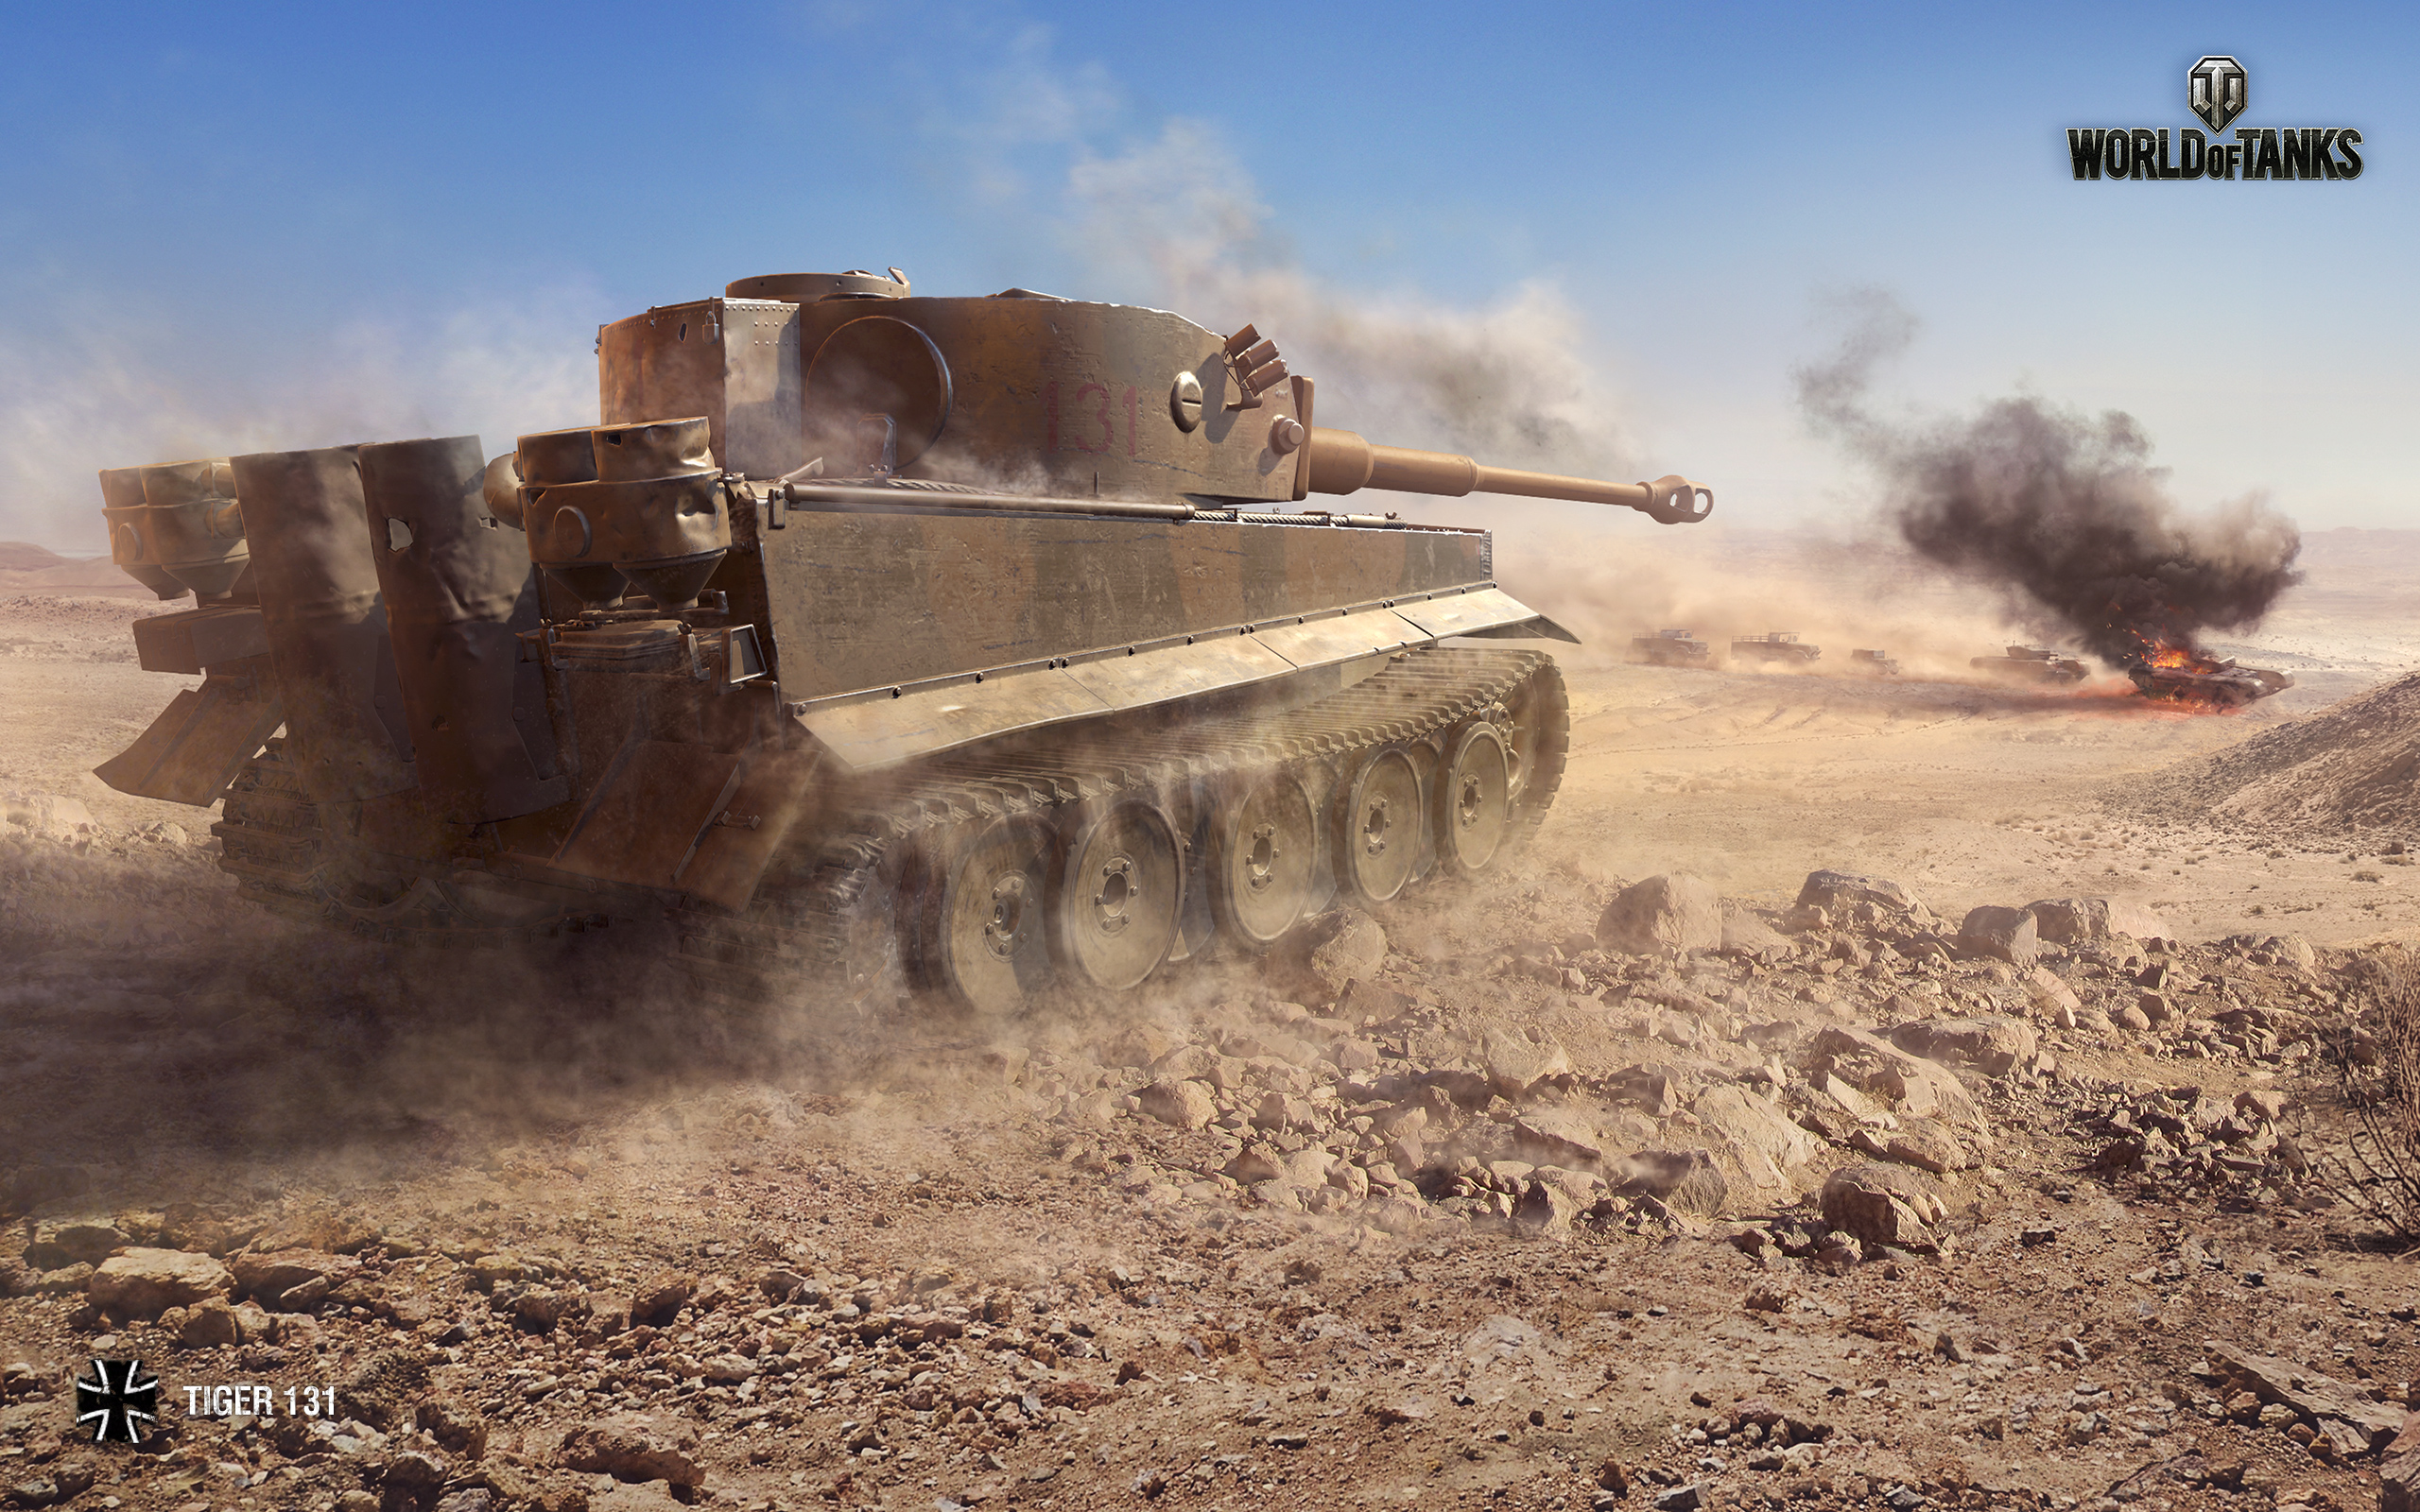 Popular Tiger 131 Image for Phone